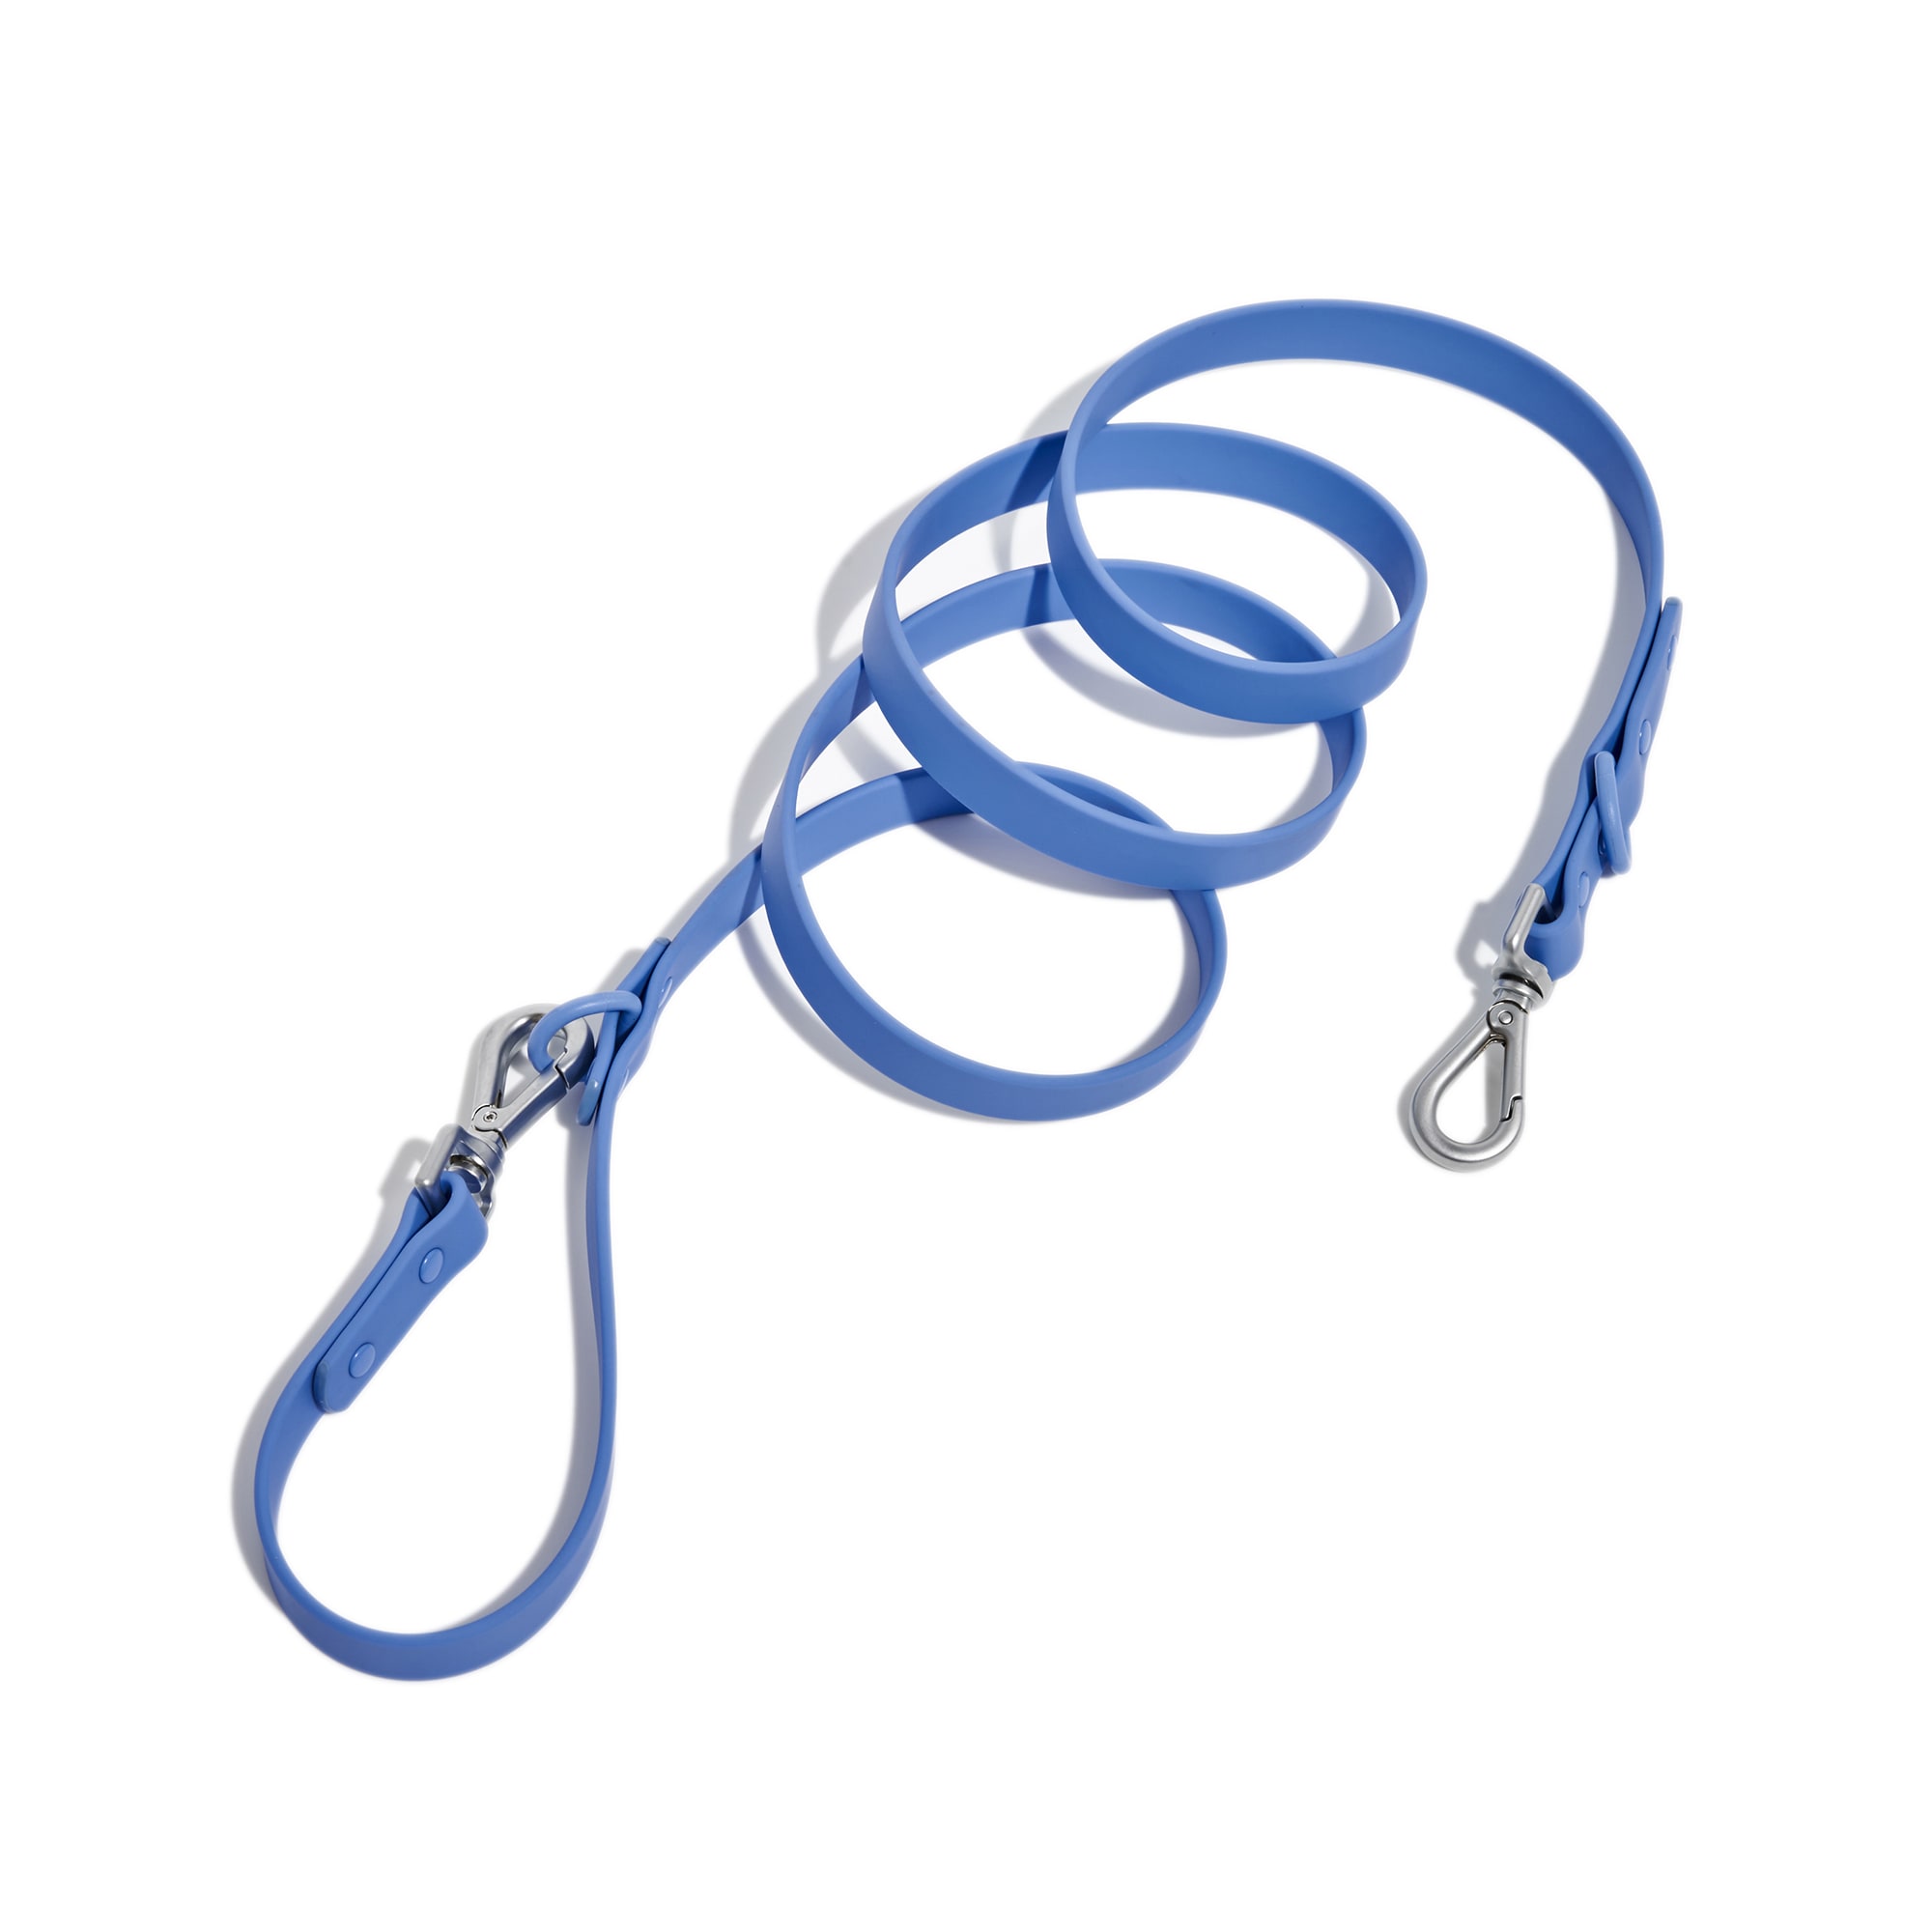 Photos - Collar / Harnesses Wild One Moonstone Dog Leash, 66" L, Large, Blue WO-LSH-SMB 